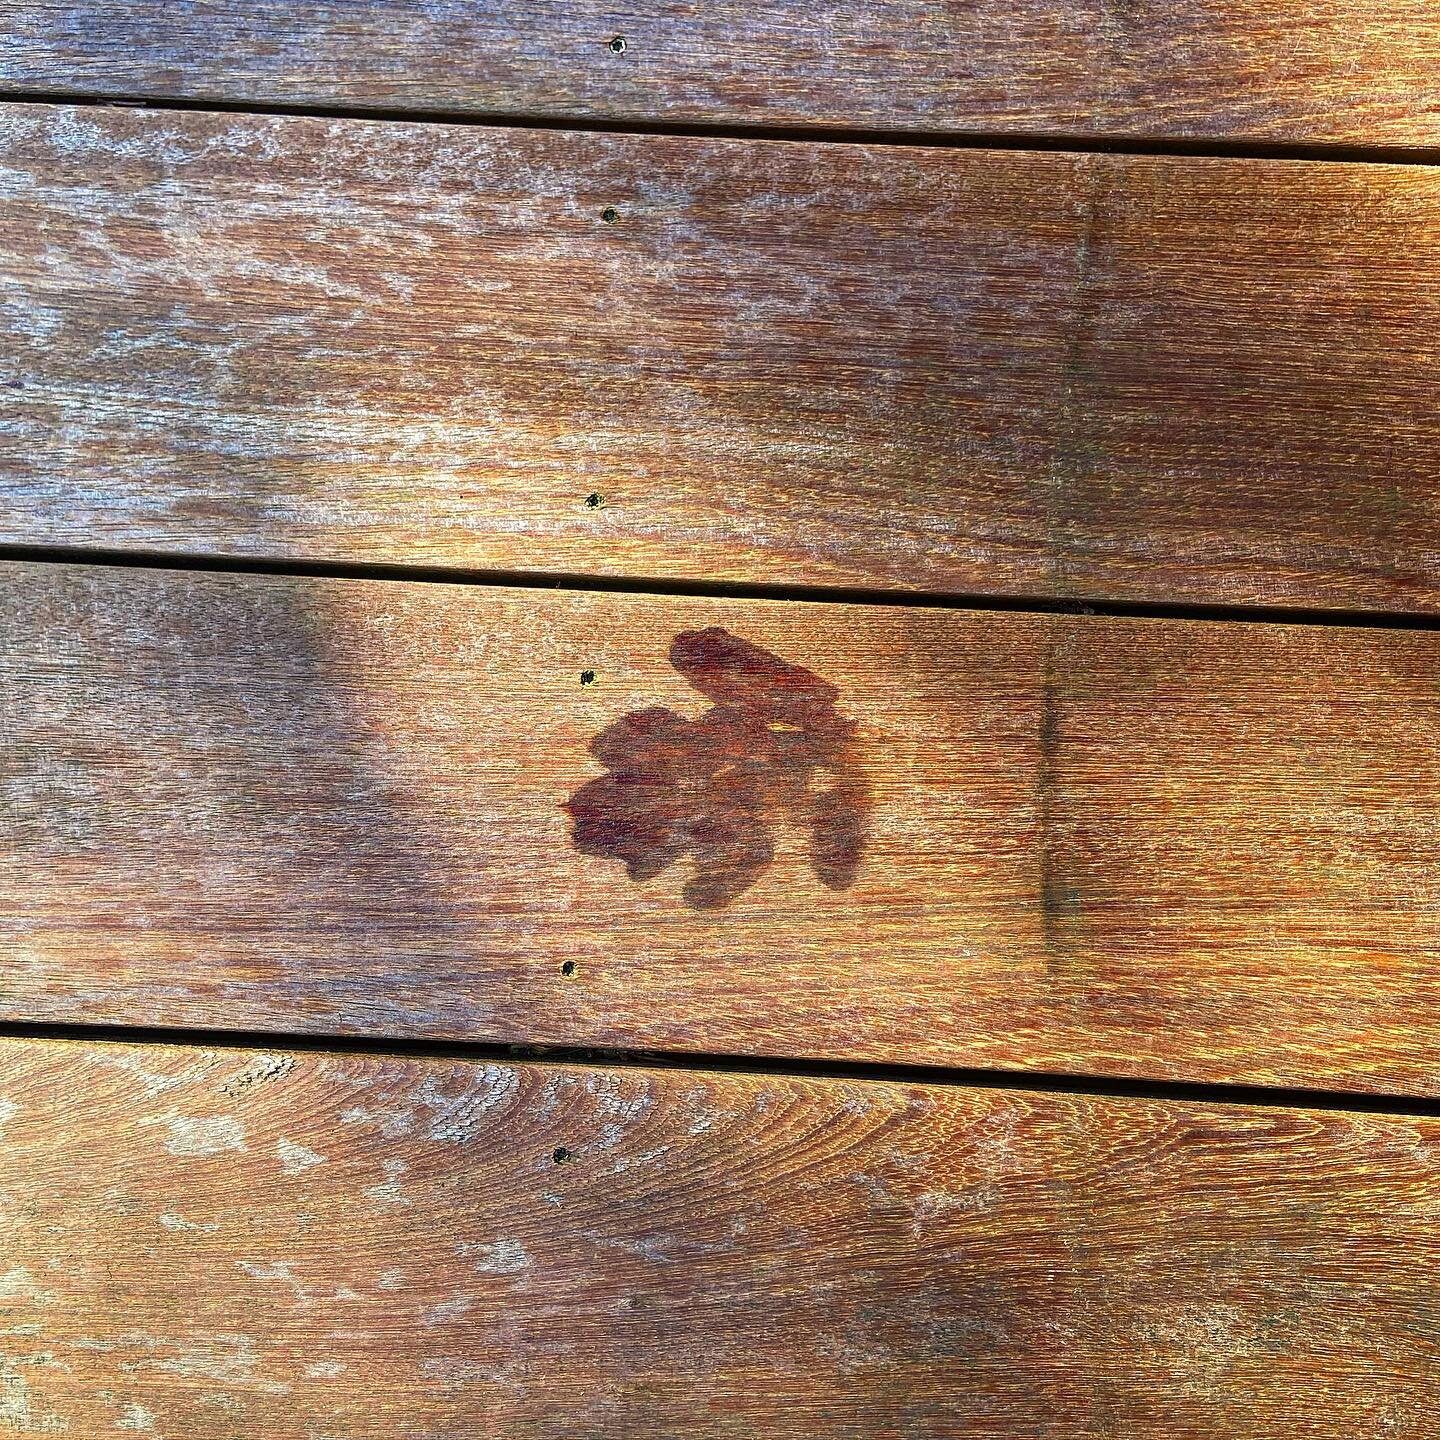 Leaf print from last weekend. We&rsquo;ve been cleaning the deck. It can get slippery in the winter with so many trees around the house. The cleaning machine has done it&rsquo;s work. All good now. Just in time for guests this week and some spring we